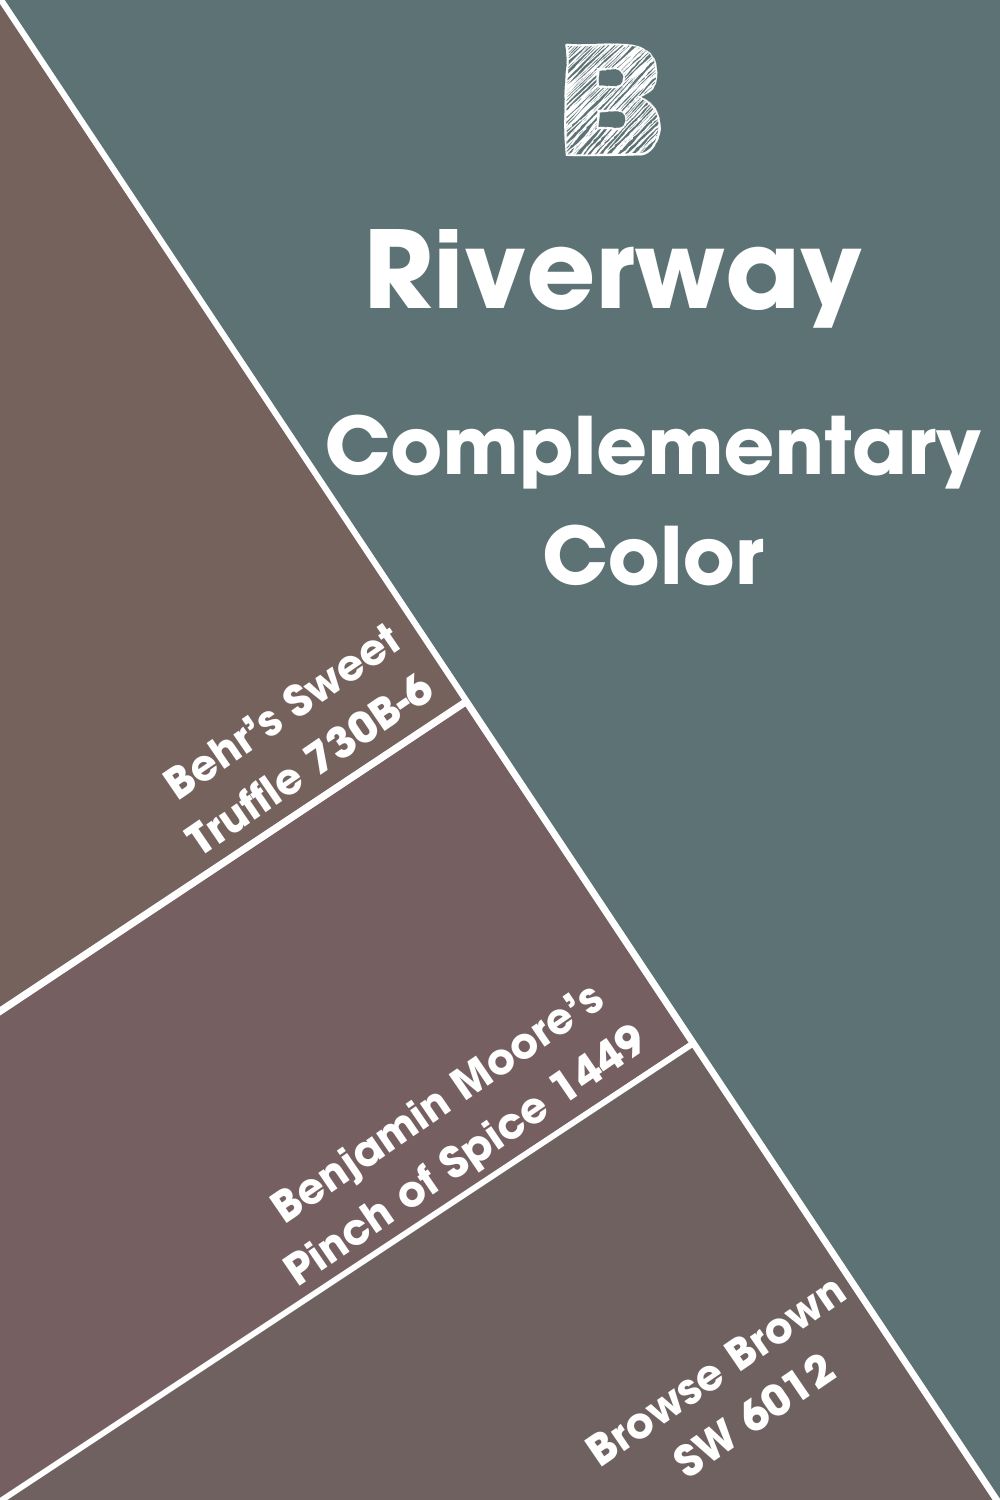 Riverway Complementary Color 